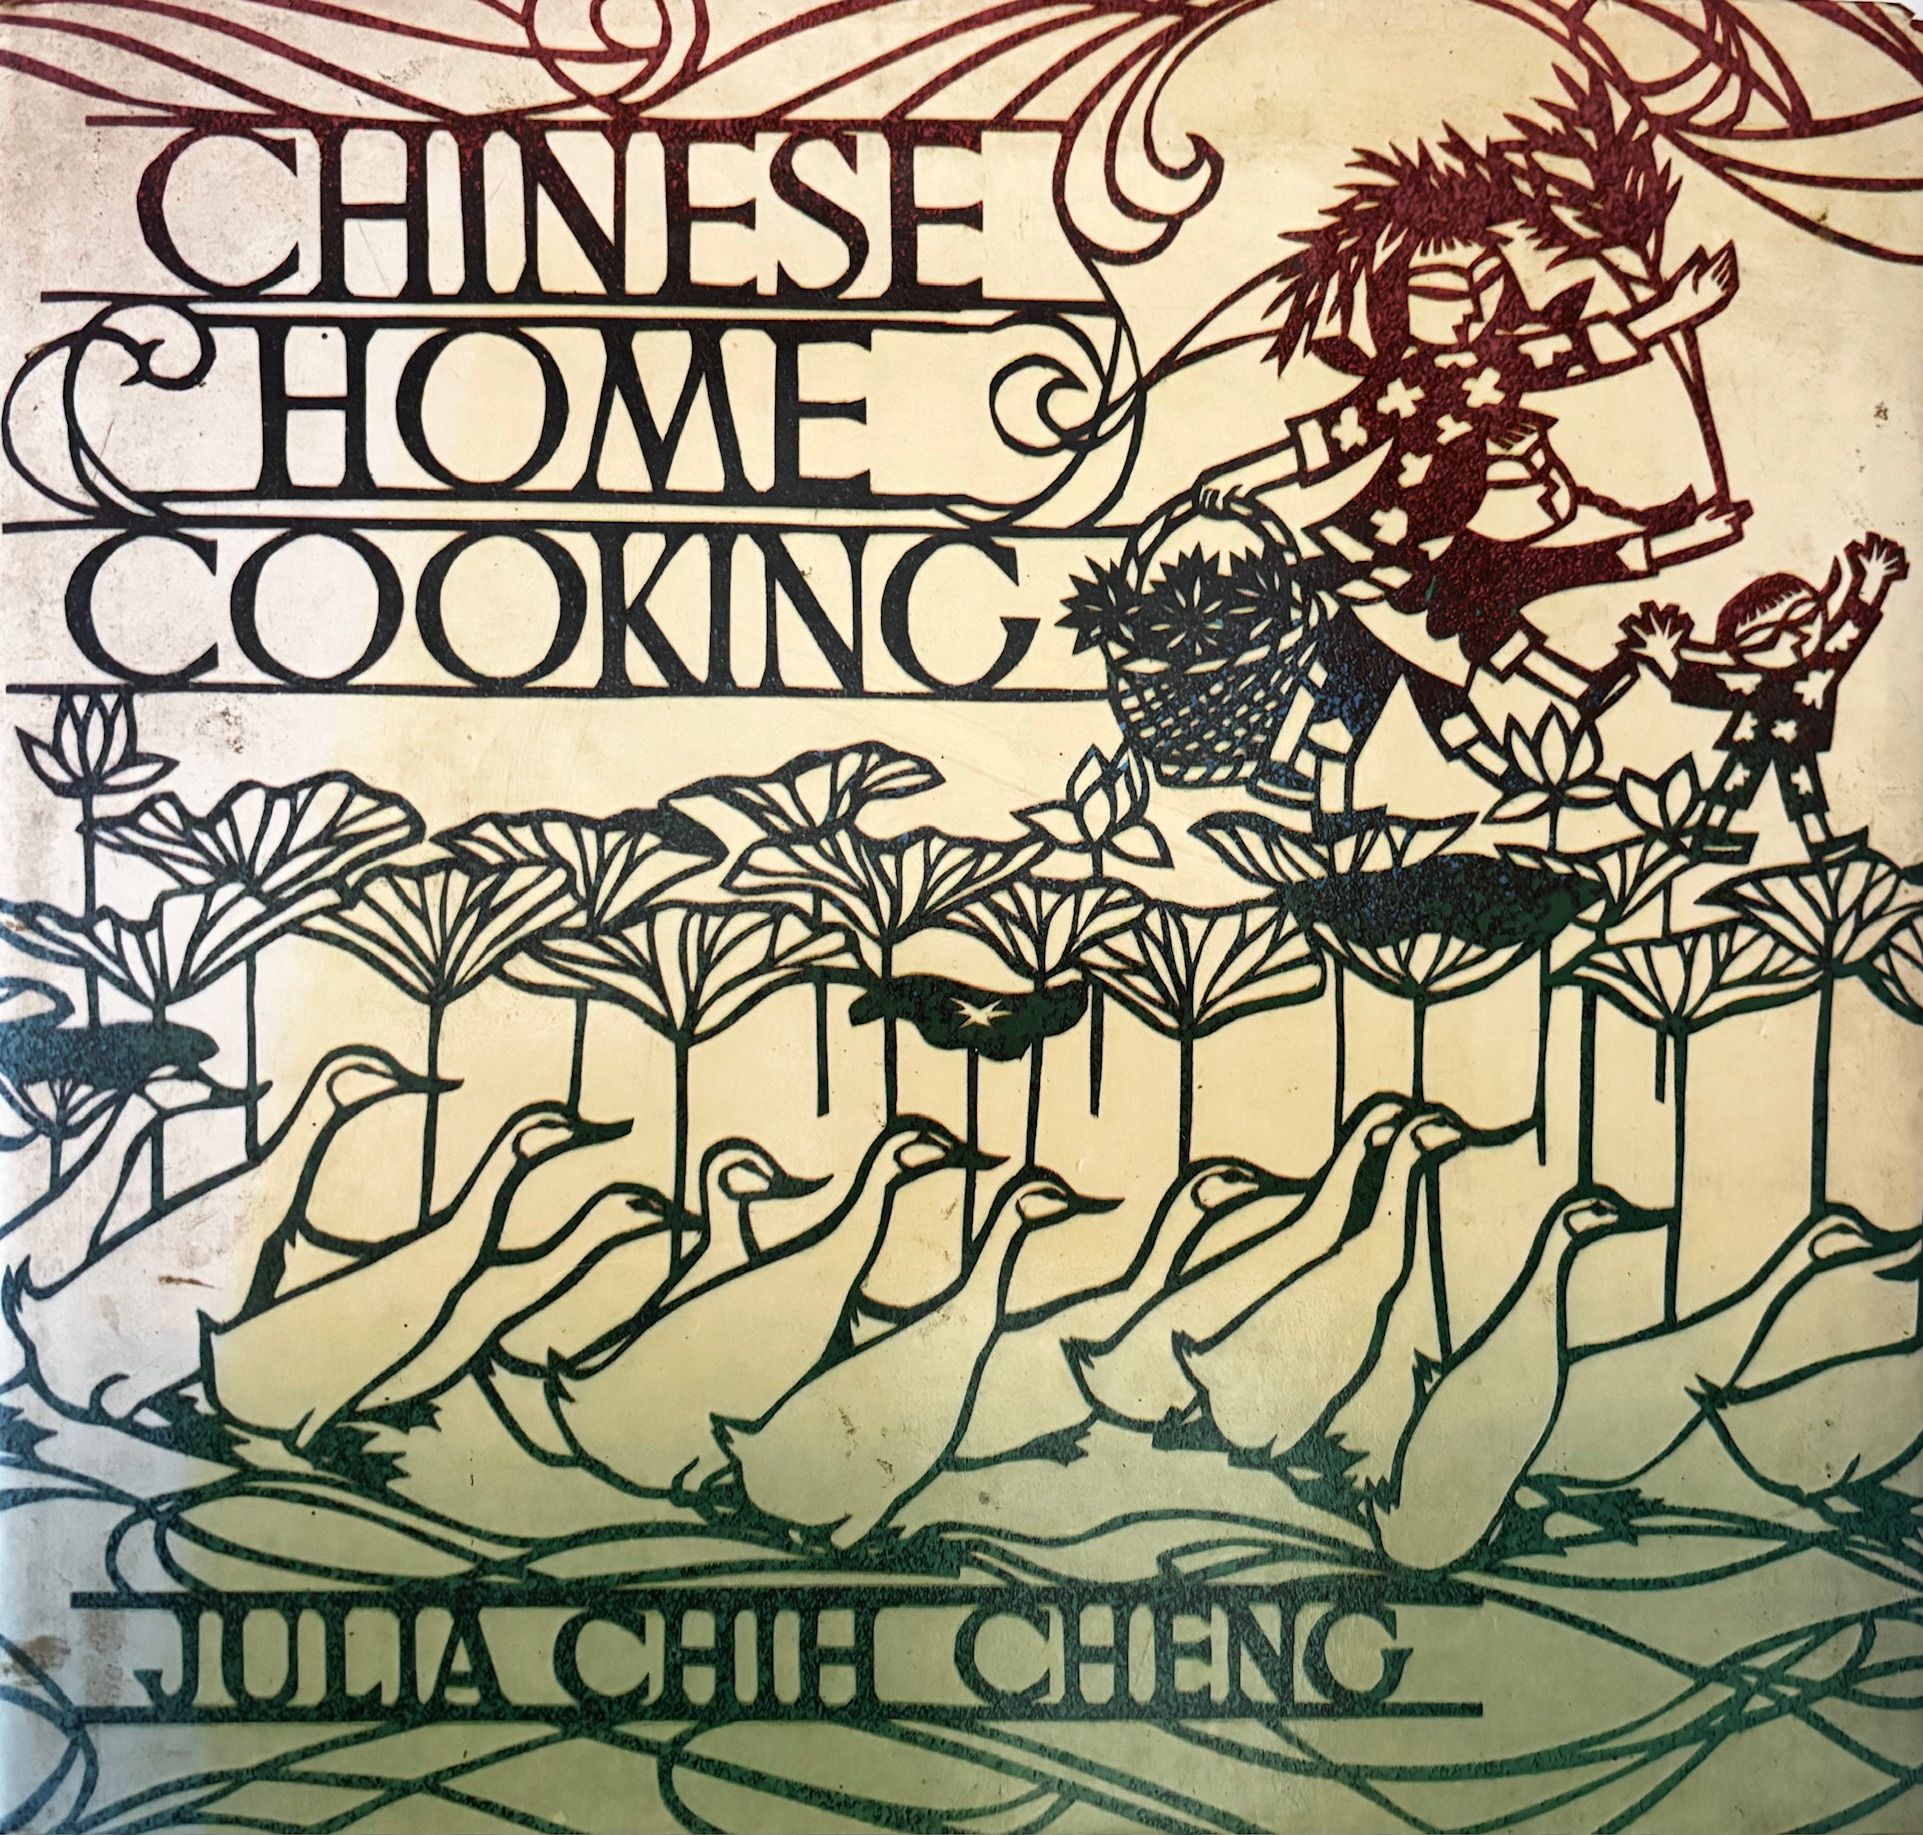 (*NEW ARRIVAL*) Chinese Home Cooking (Julia Chih Cheng)